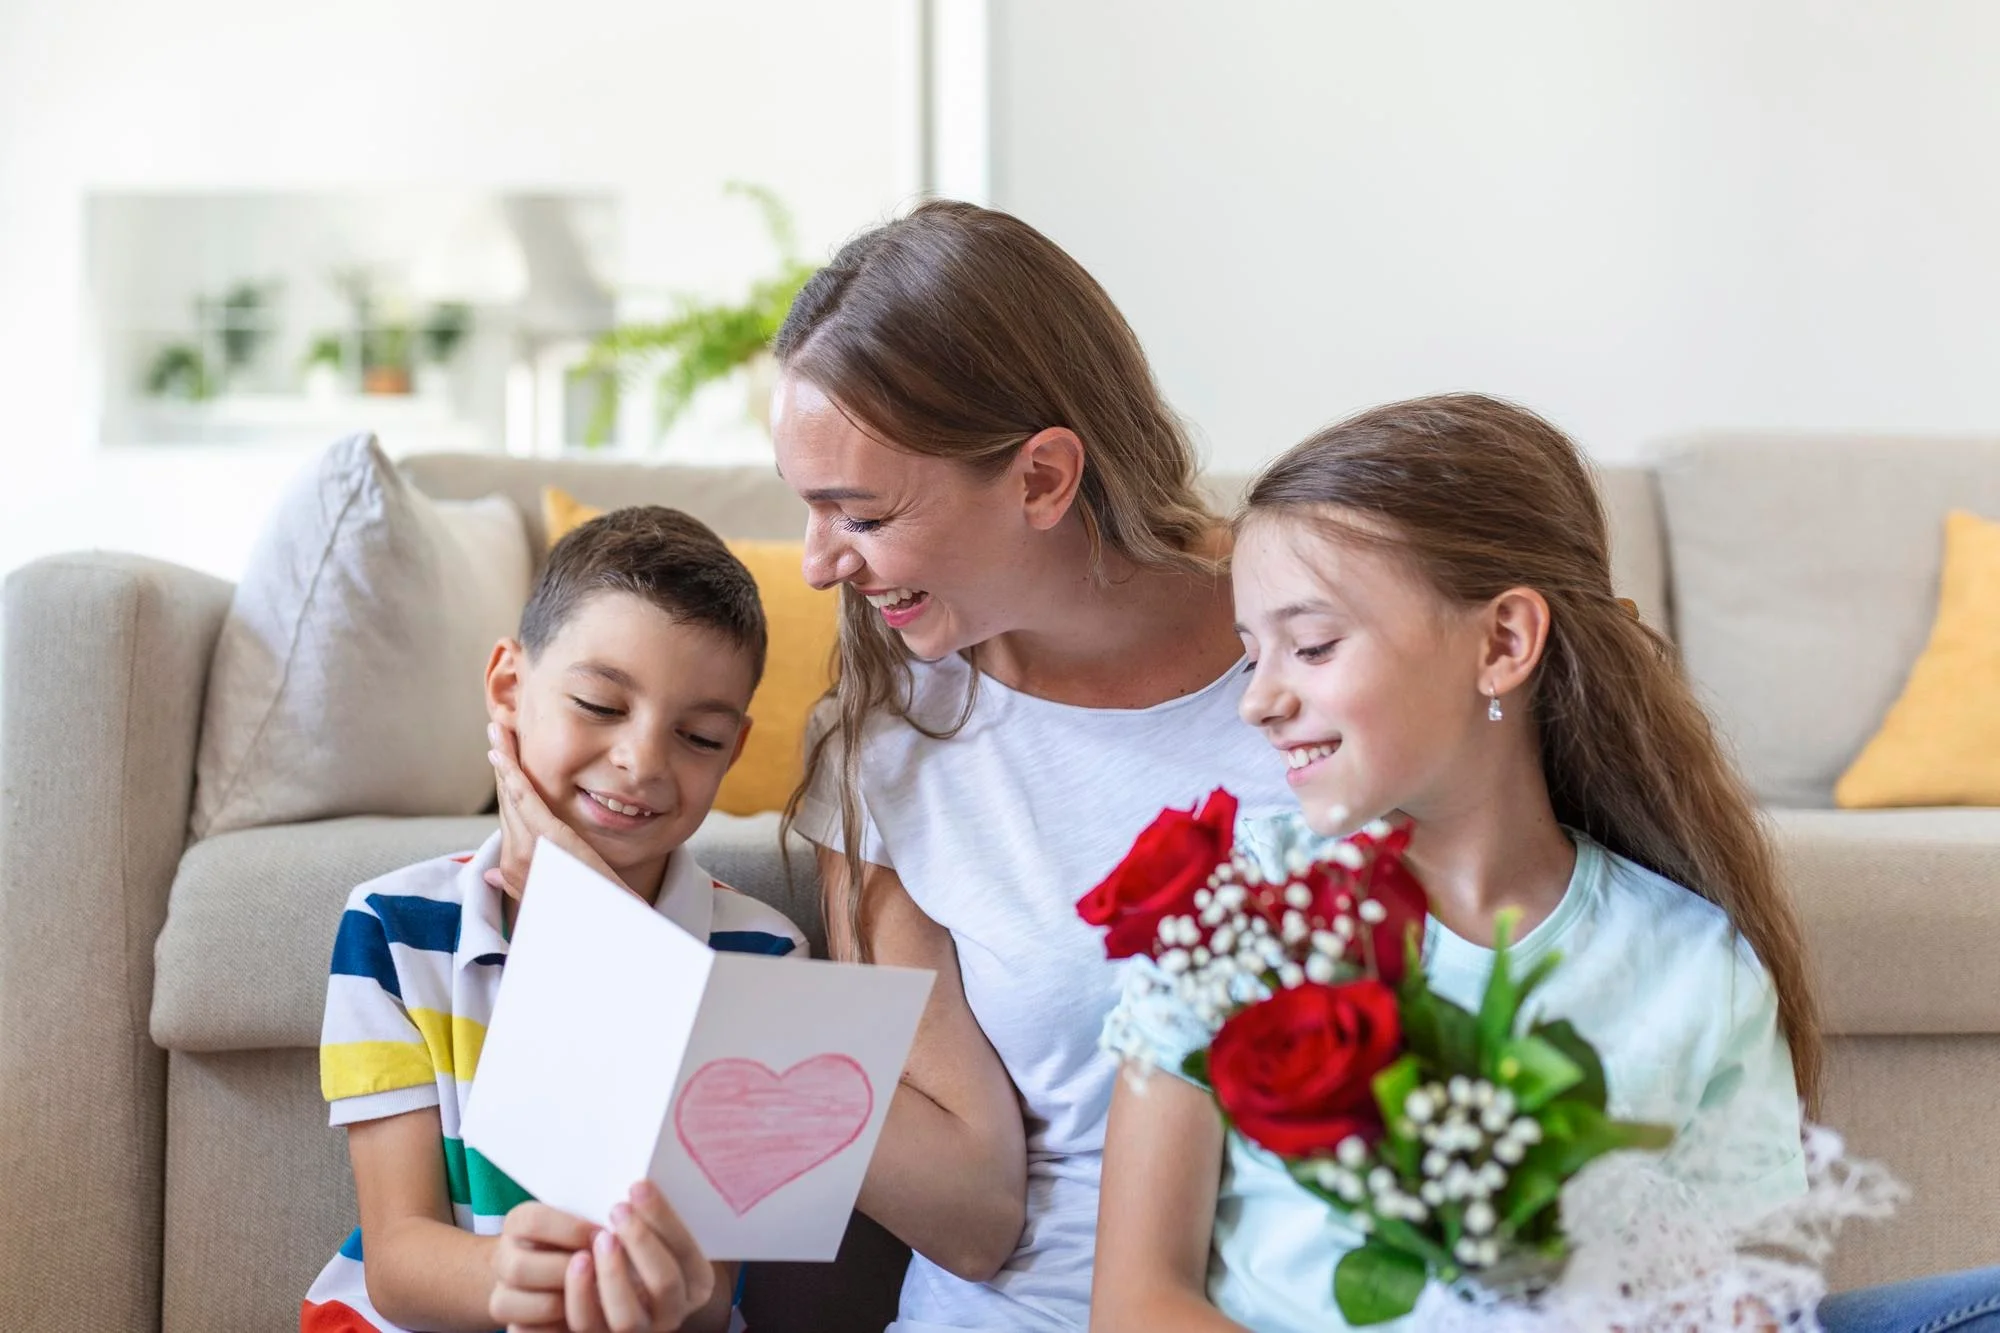 young mother with bouquet roses laughs hugging her son sheerful girl with card congratulates mom during holiday celebration kitchen home 657921 1407